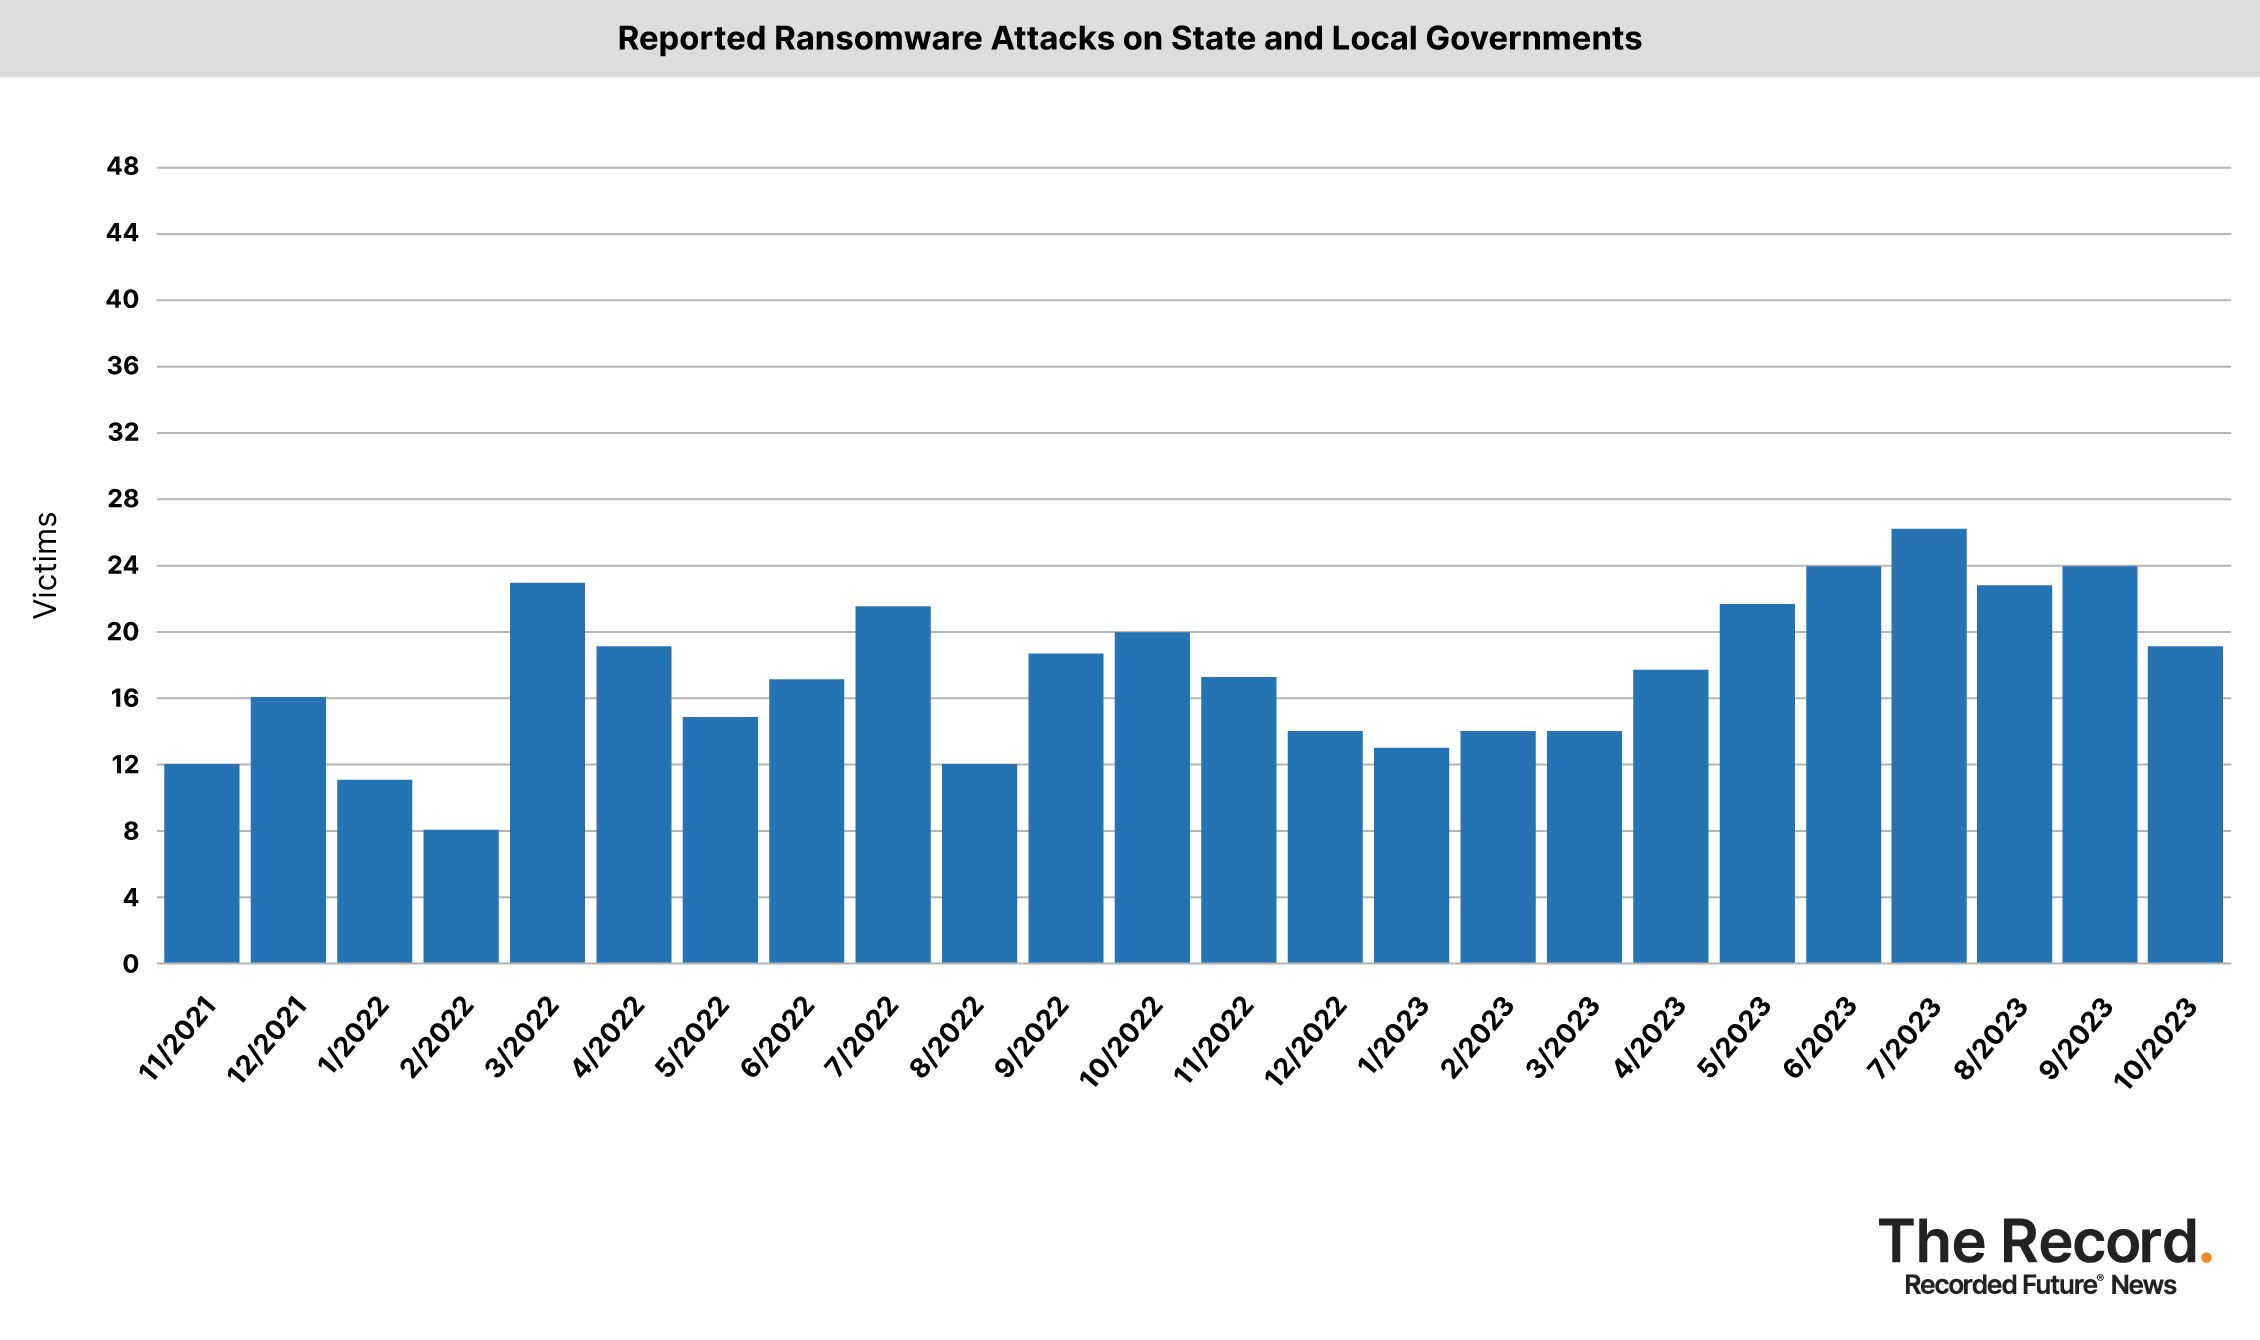 2023_1109 - Ransomware Tracker - Reported Ransomware Attacks on State and Local Governments.jpg